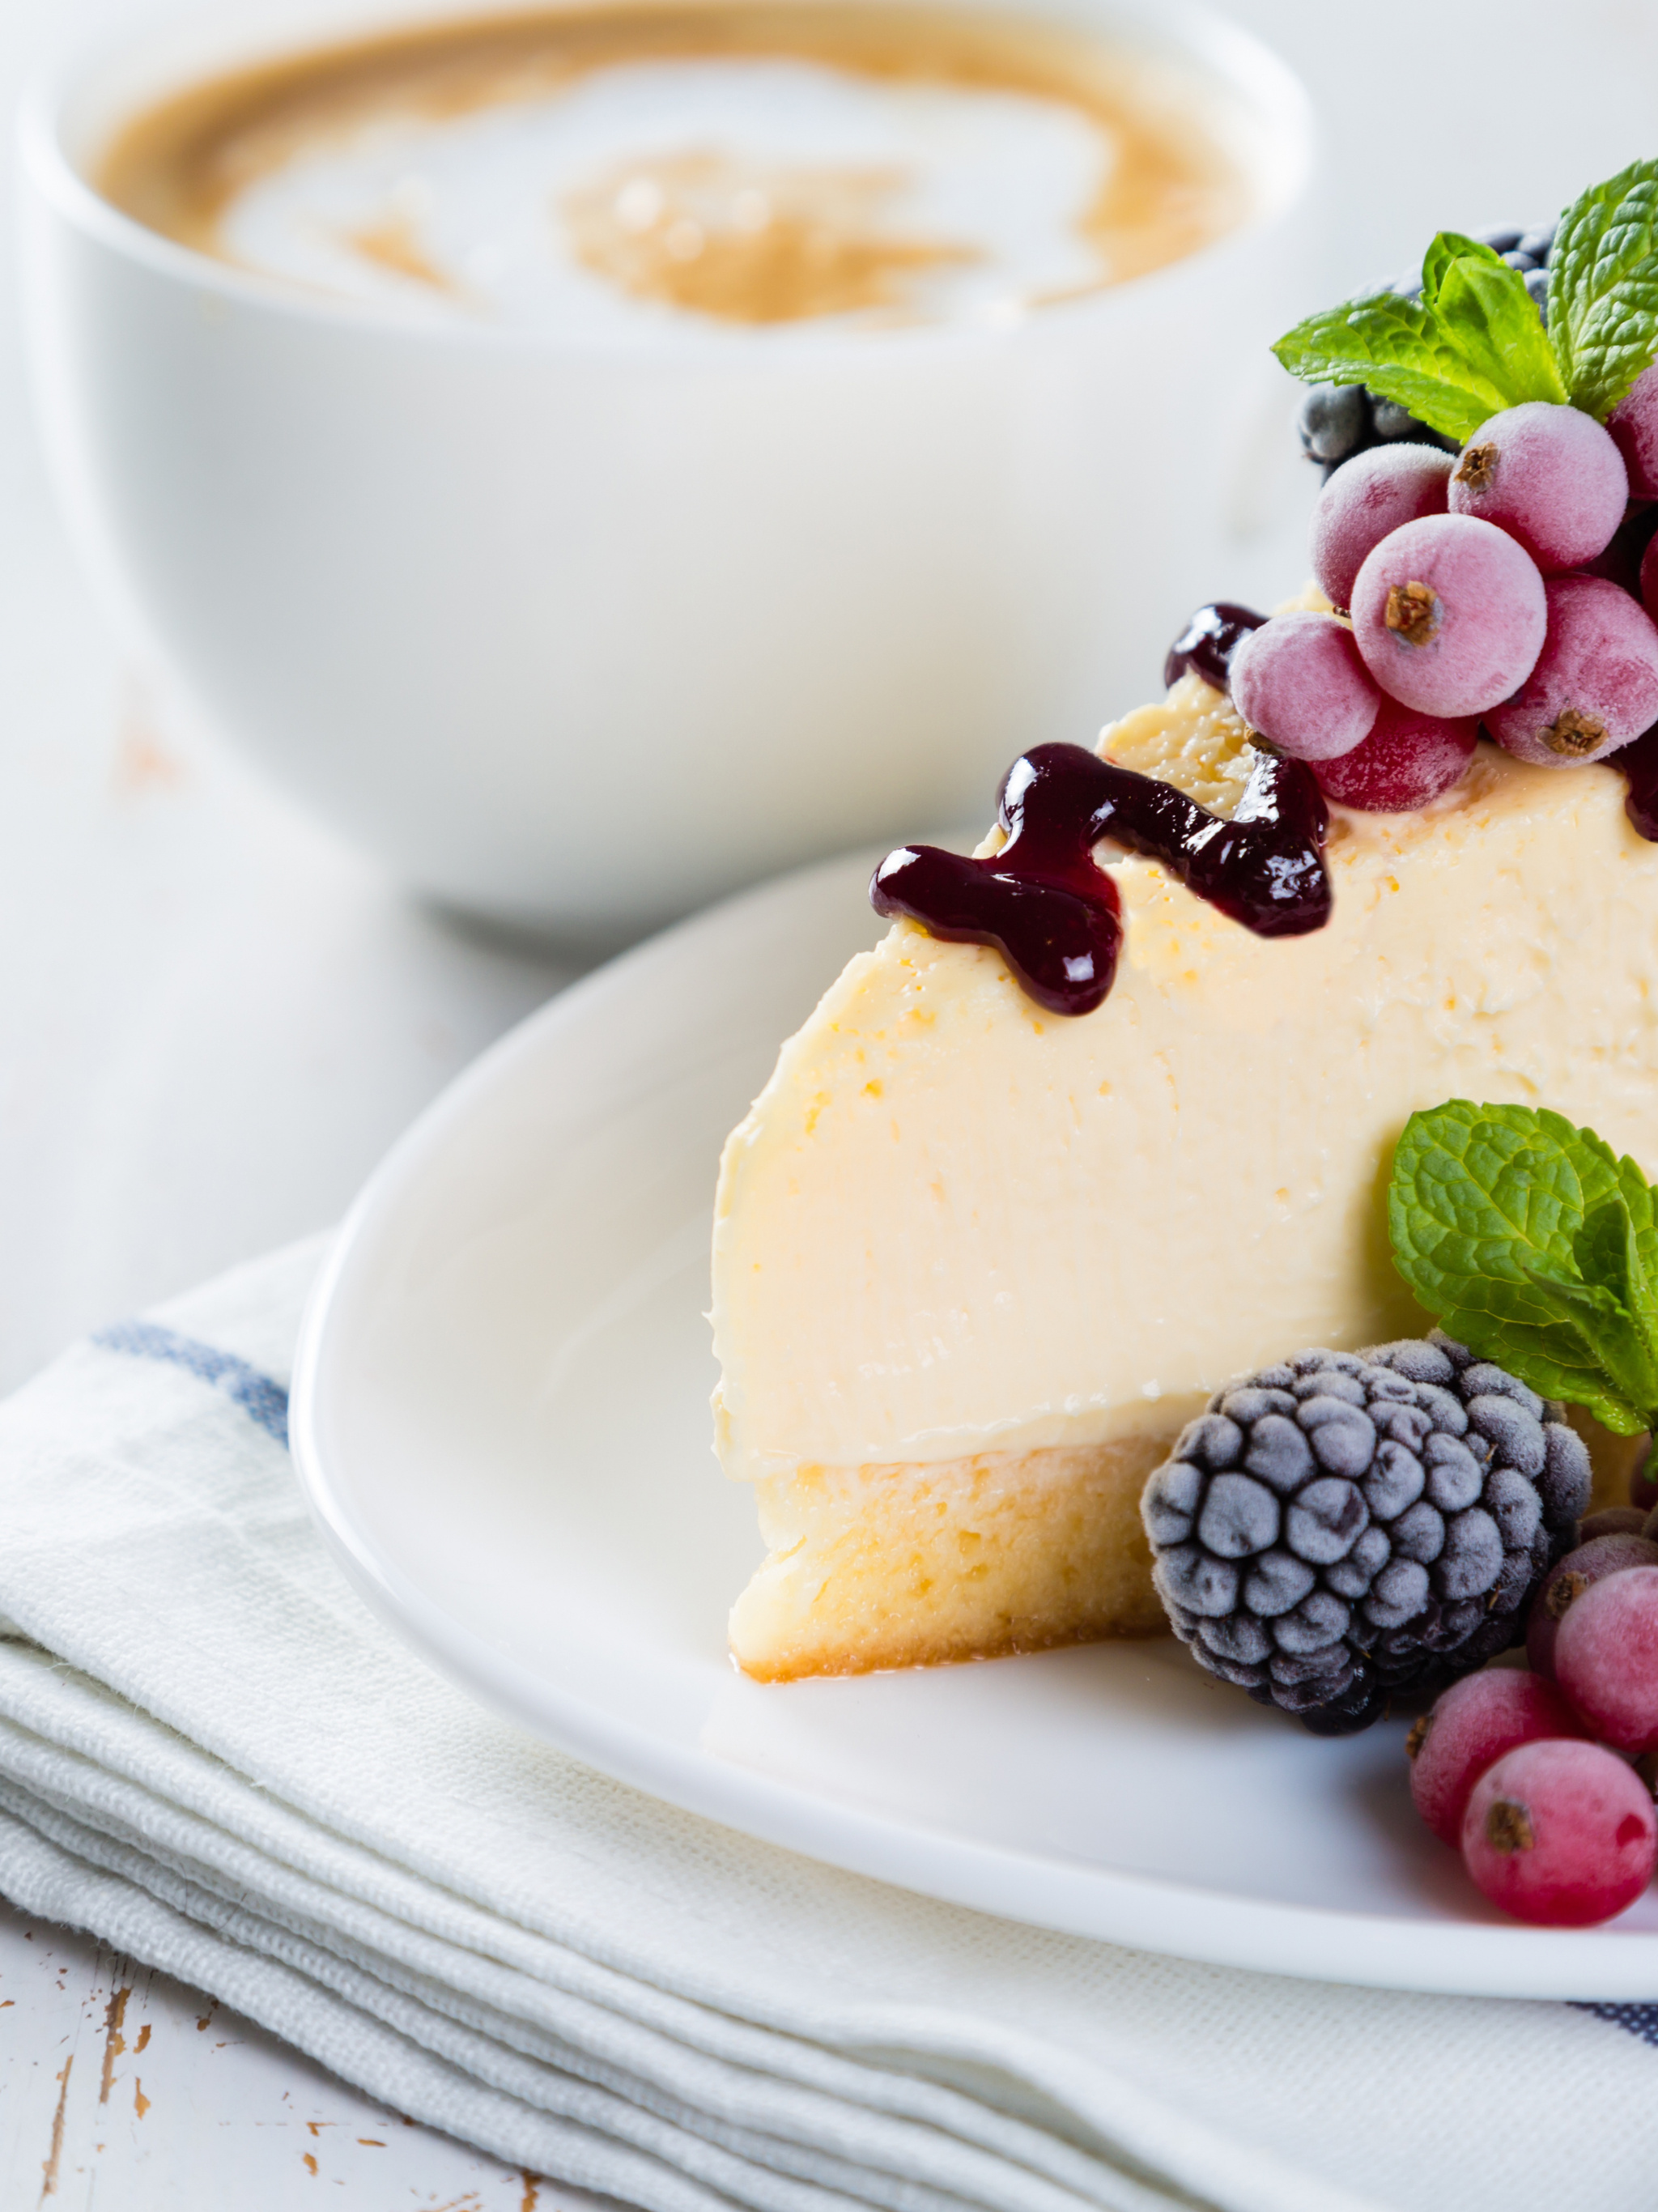 Cheesecake: A creamy cake, A favorite for sweet tooths of all ages. 2050x2740 HD Wallpaper.